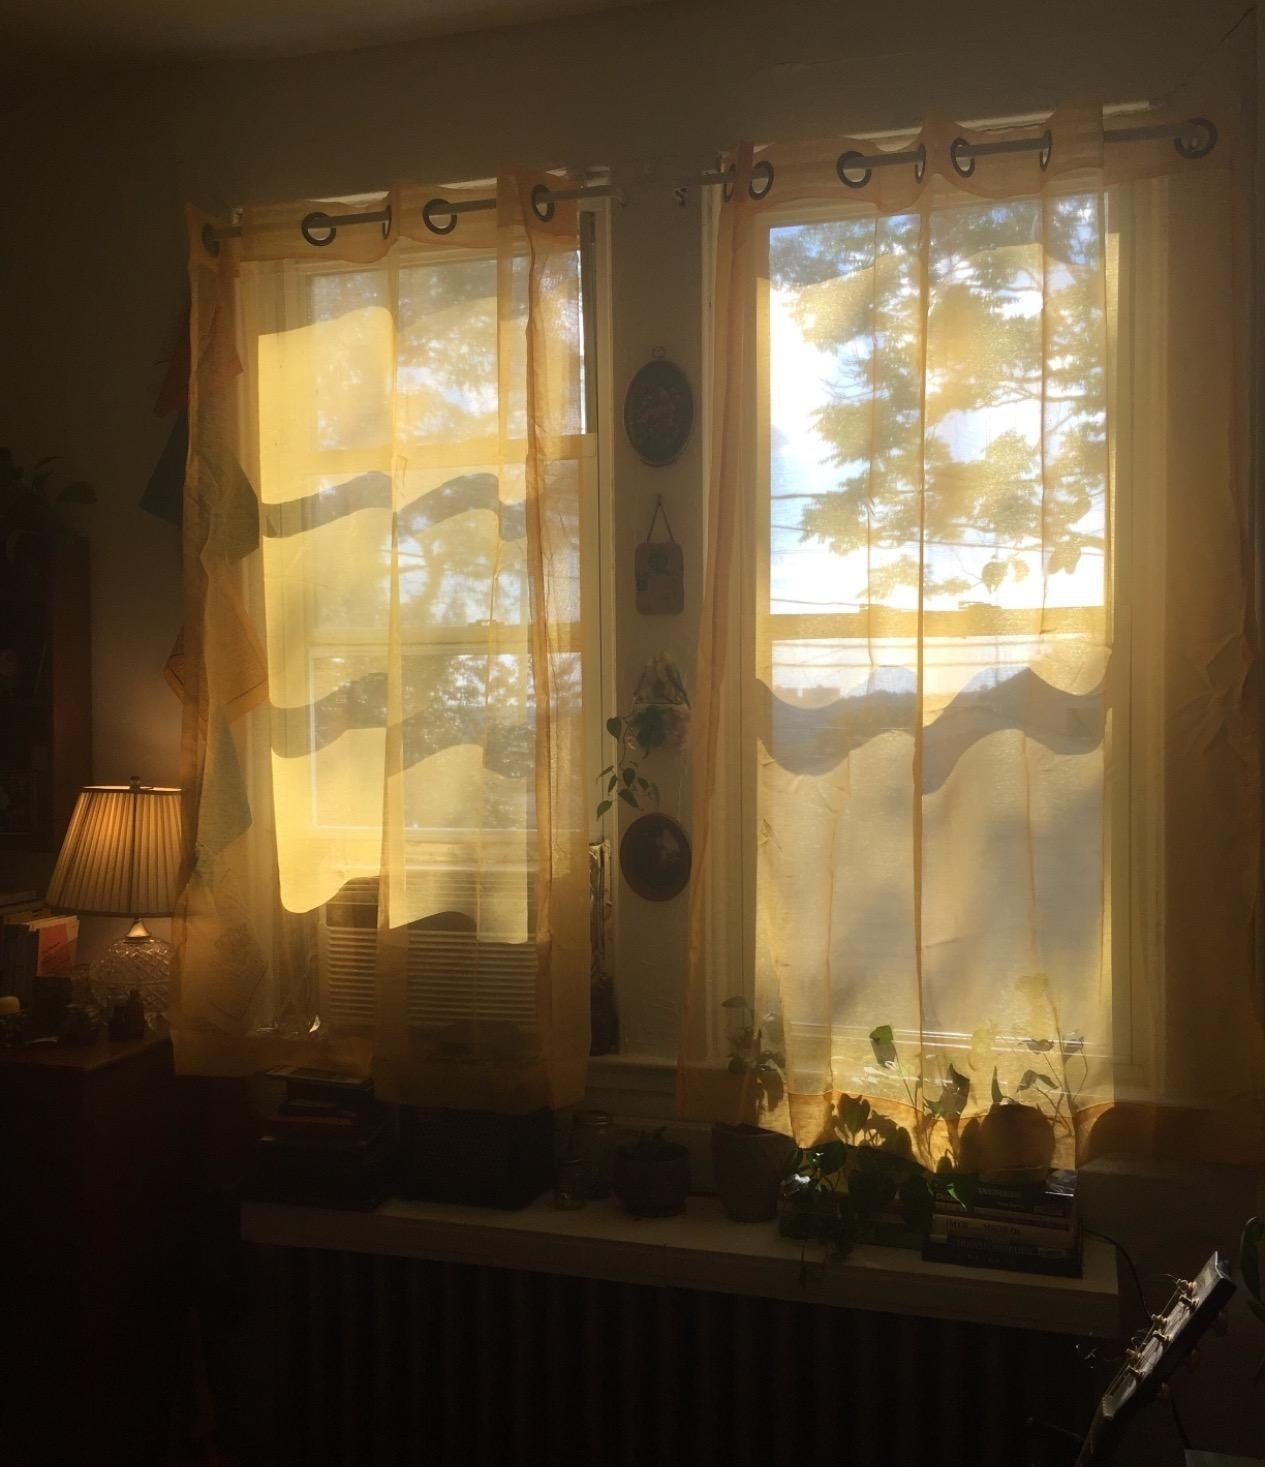 Sheer white curtains in a window with light streaming through